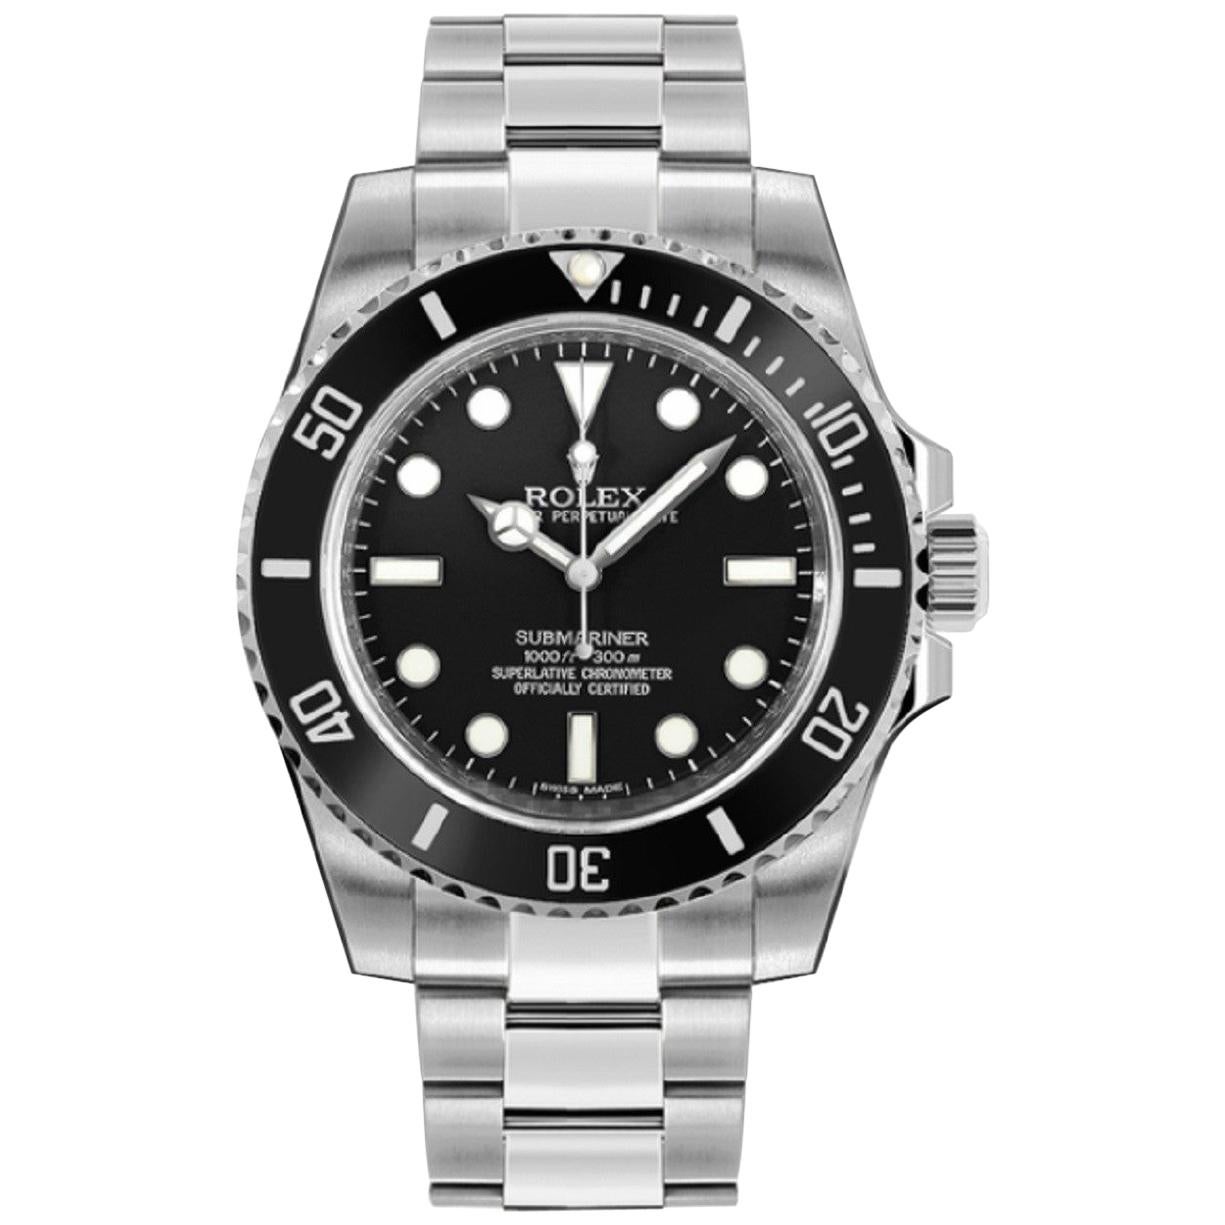 Rolex Submariner 126610LN New 2020 Black Dial Men's Watch Box and Paper